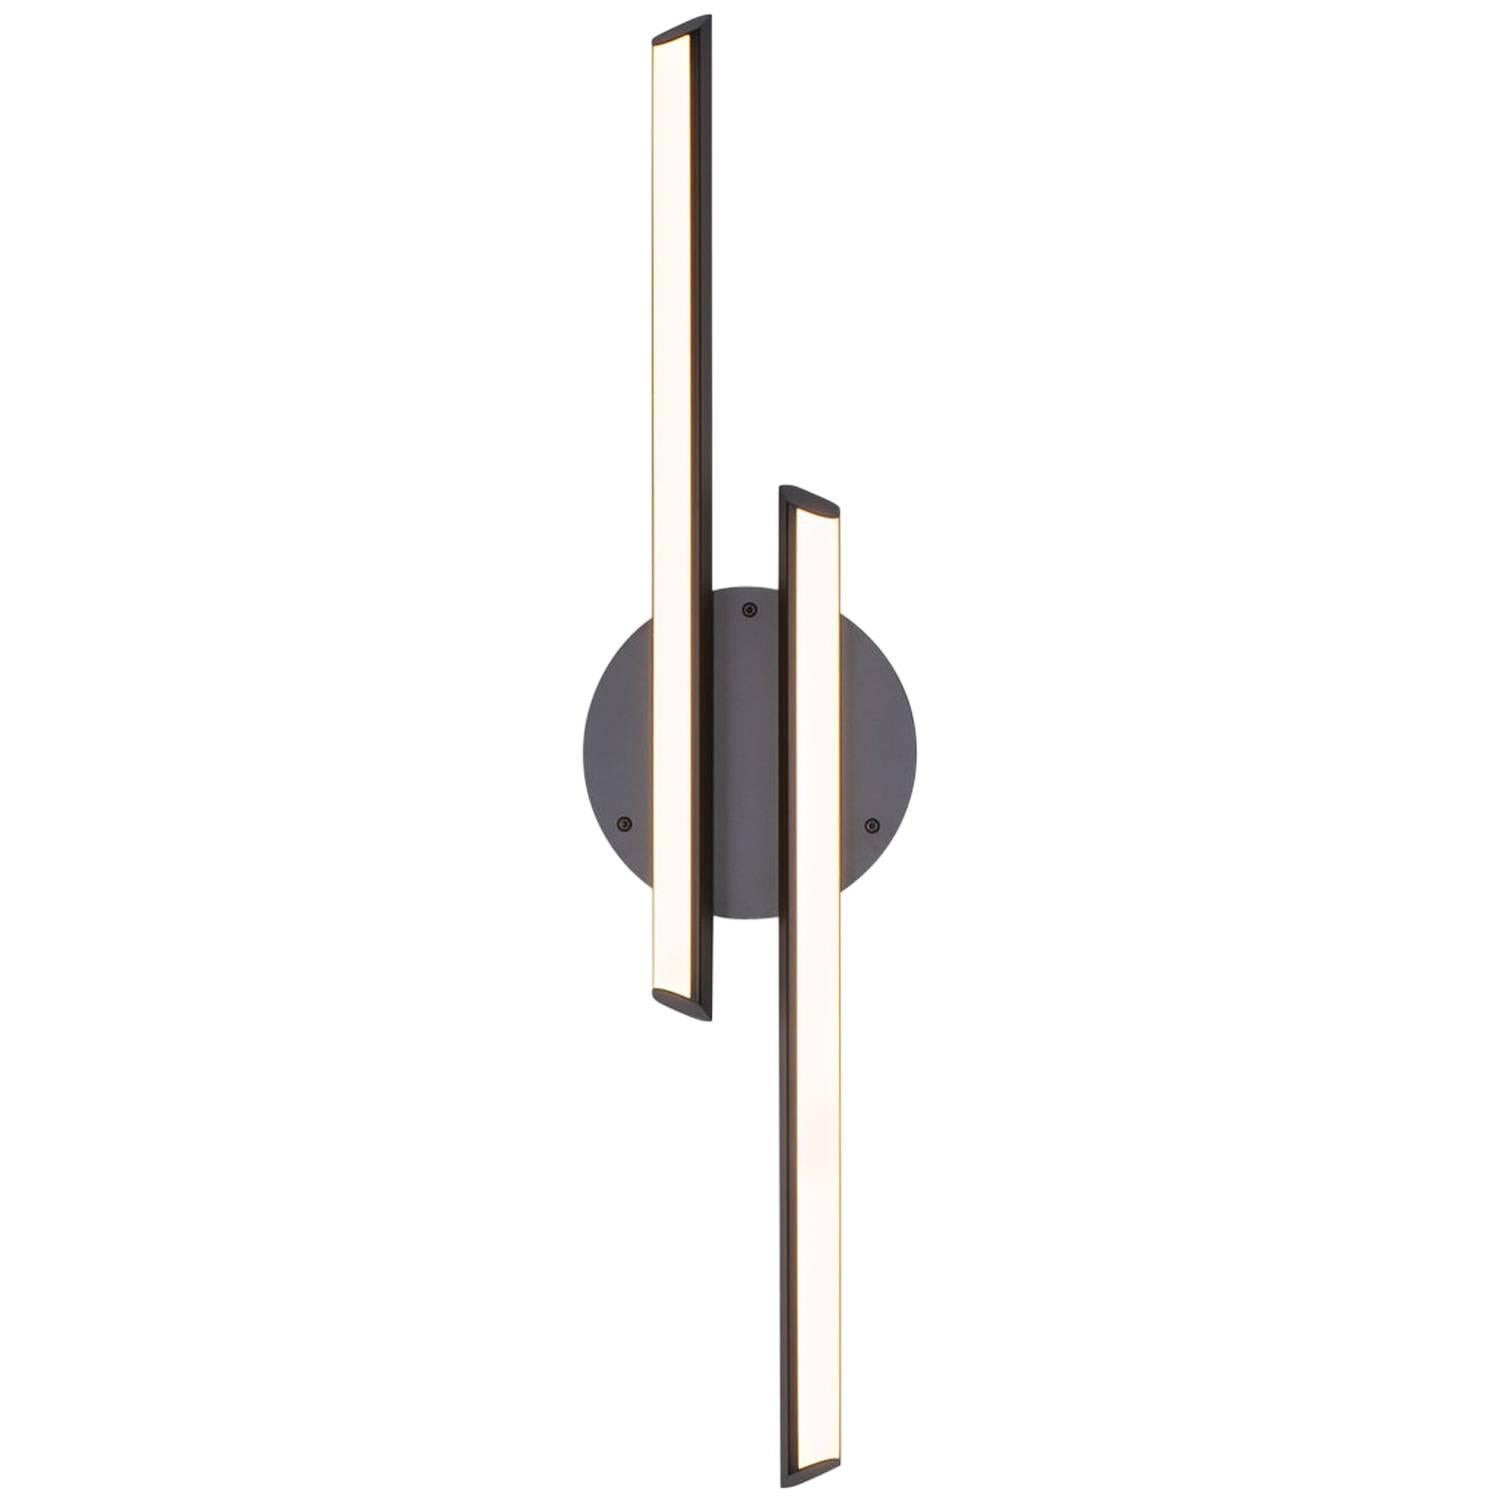 CHIME CONTRA 34 Vertical Geometric Modern LED Sconce Light Fixture